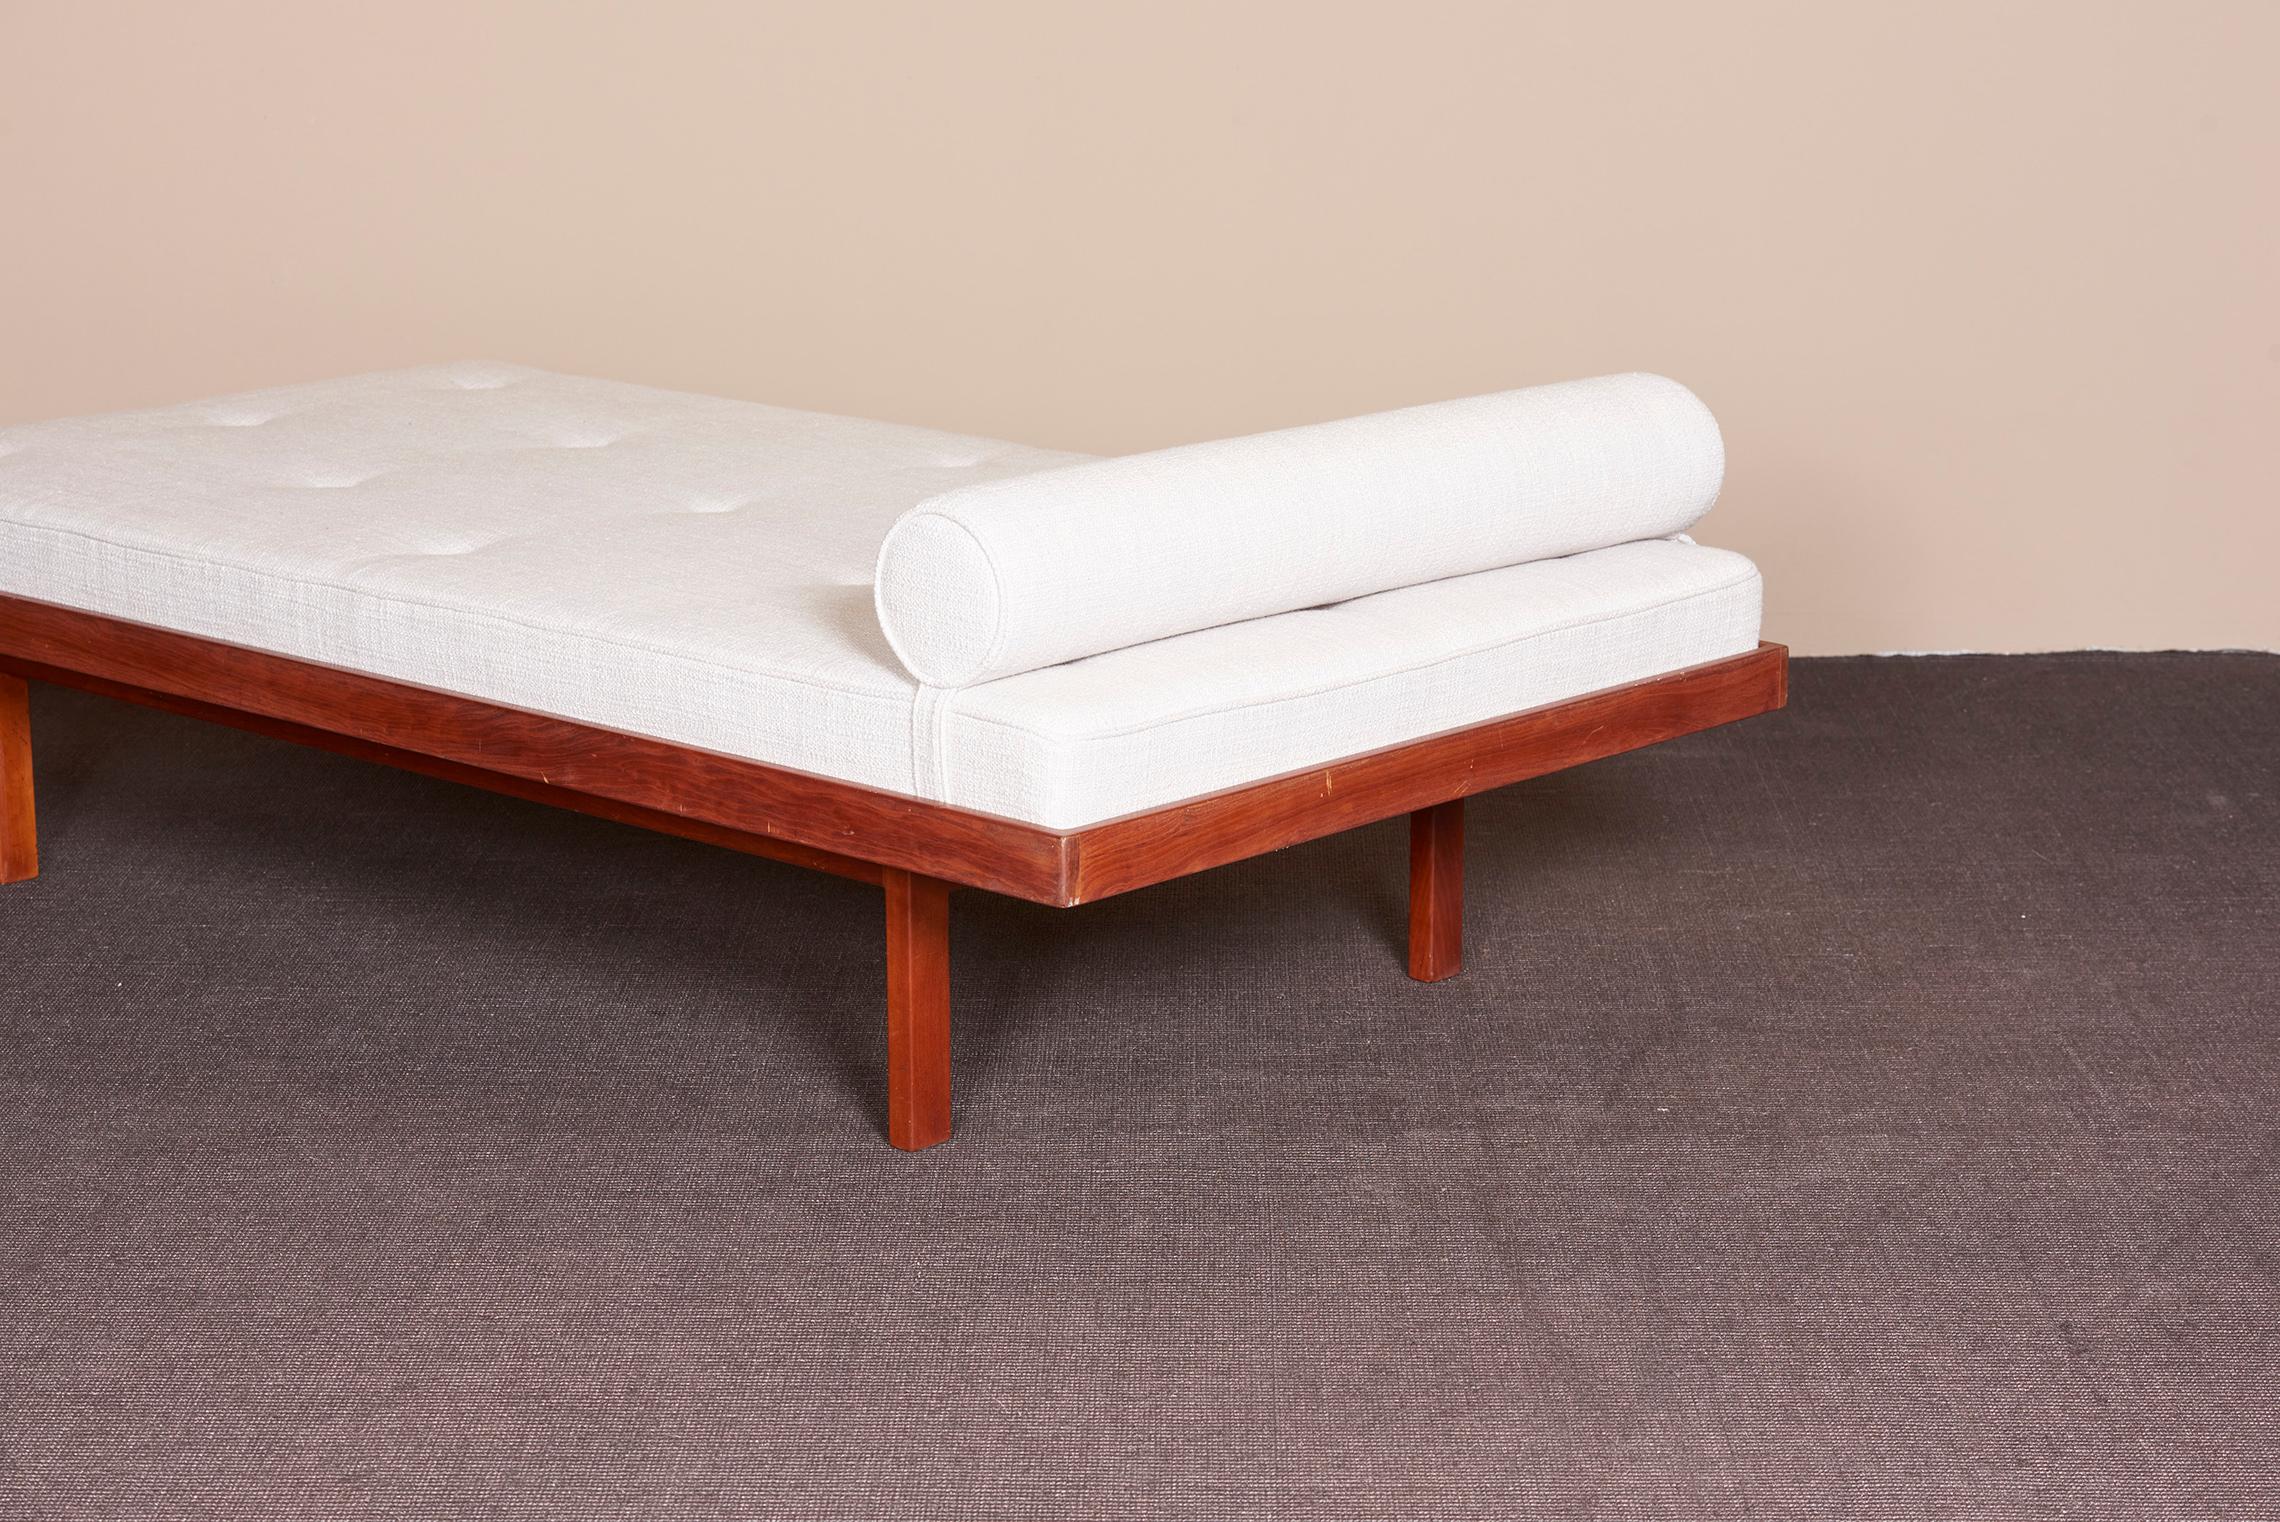 1 of 2 American Studio Walnut Frame Daybeds in Mark Alexander Fabric, US 1960s For Sale 6